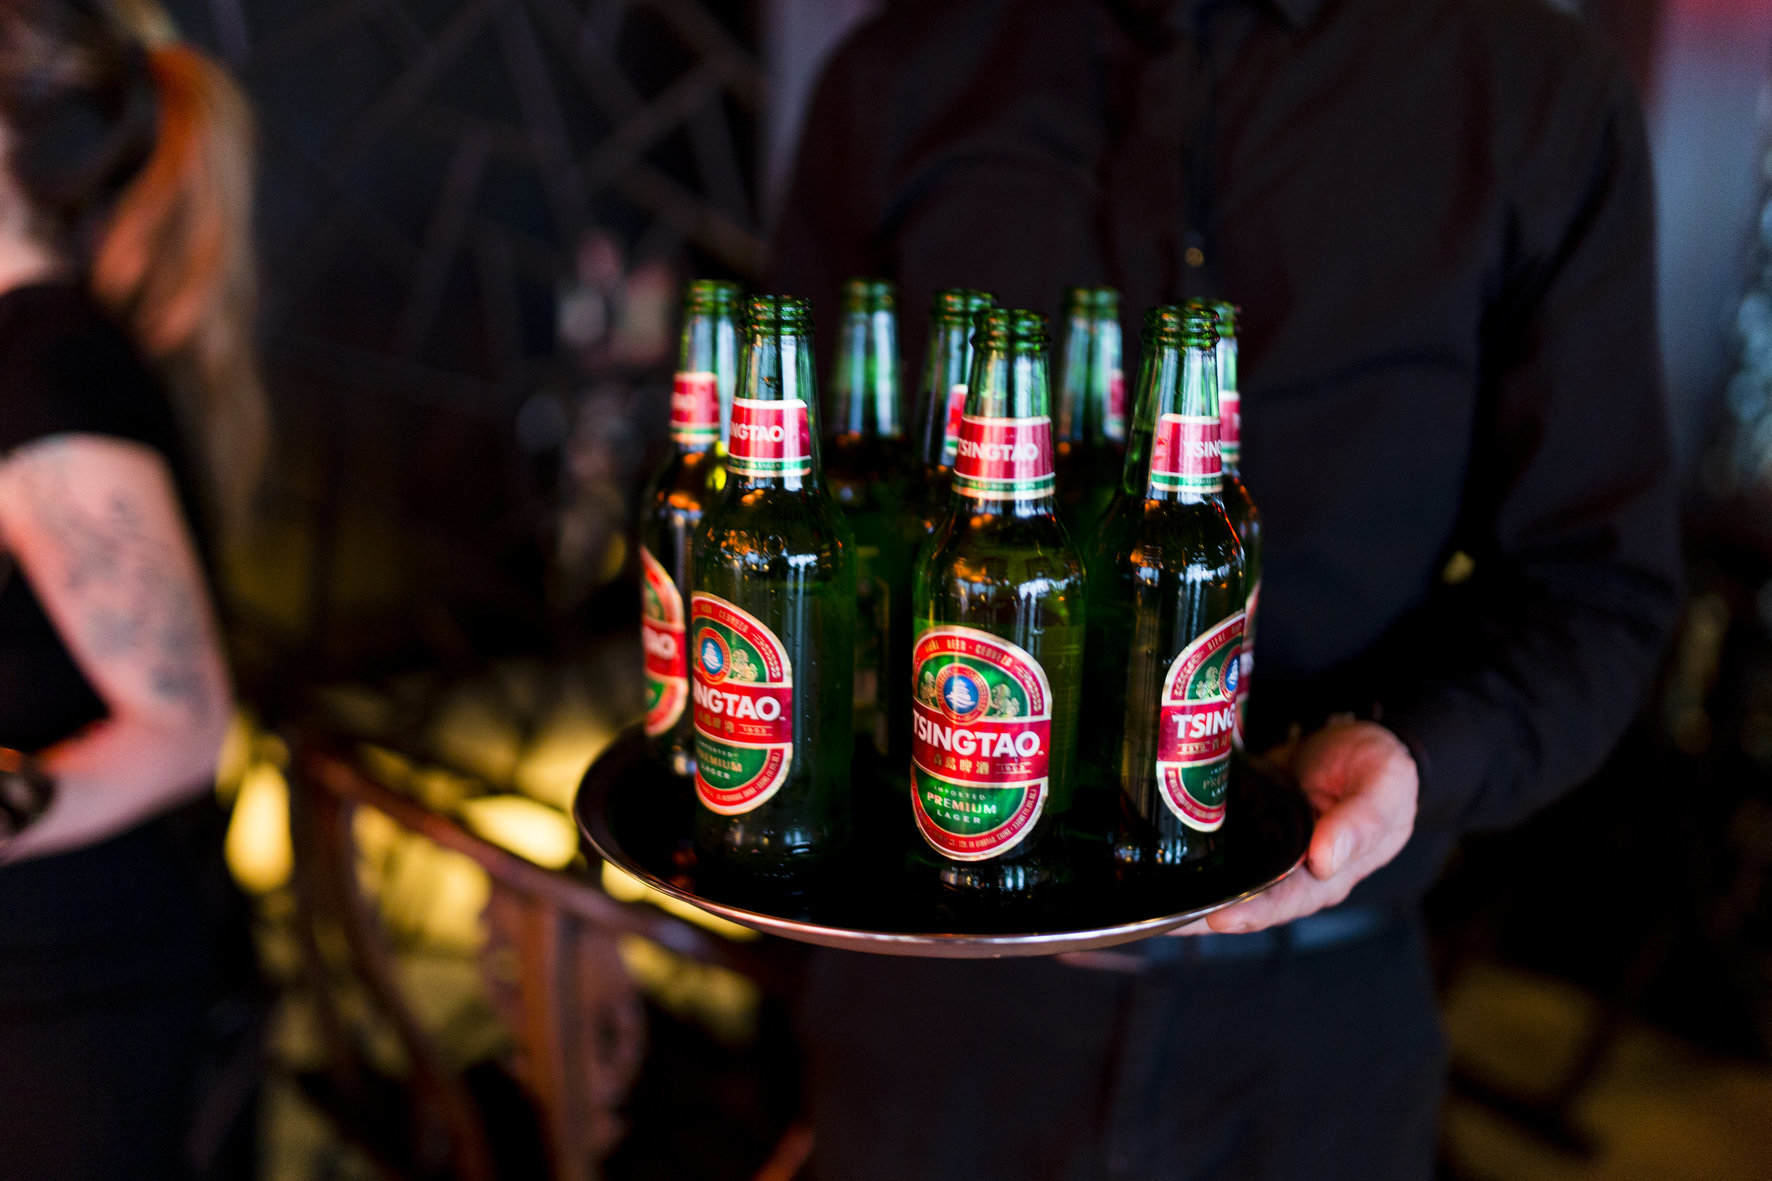 The C&C Group has set up an exclusive distribution partnership with Tsingtao Brewery Company, to import and distribute Tsingtao beer in the UK and Ireland.